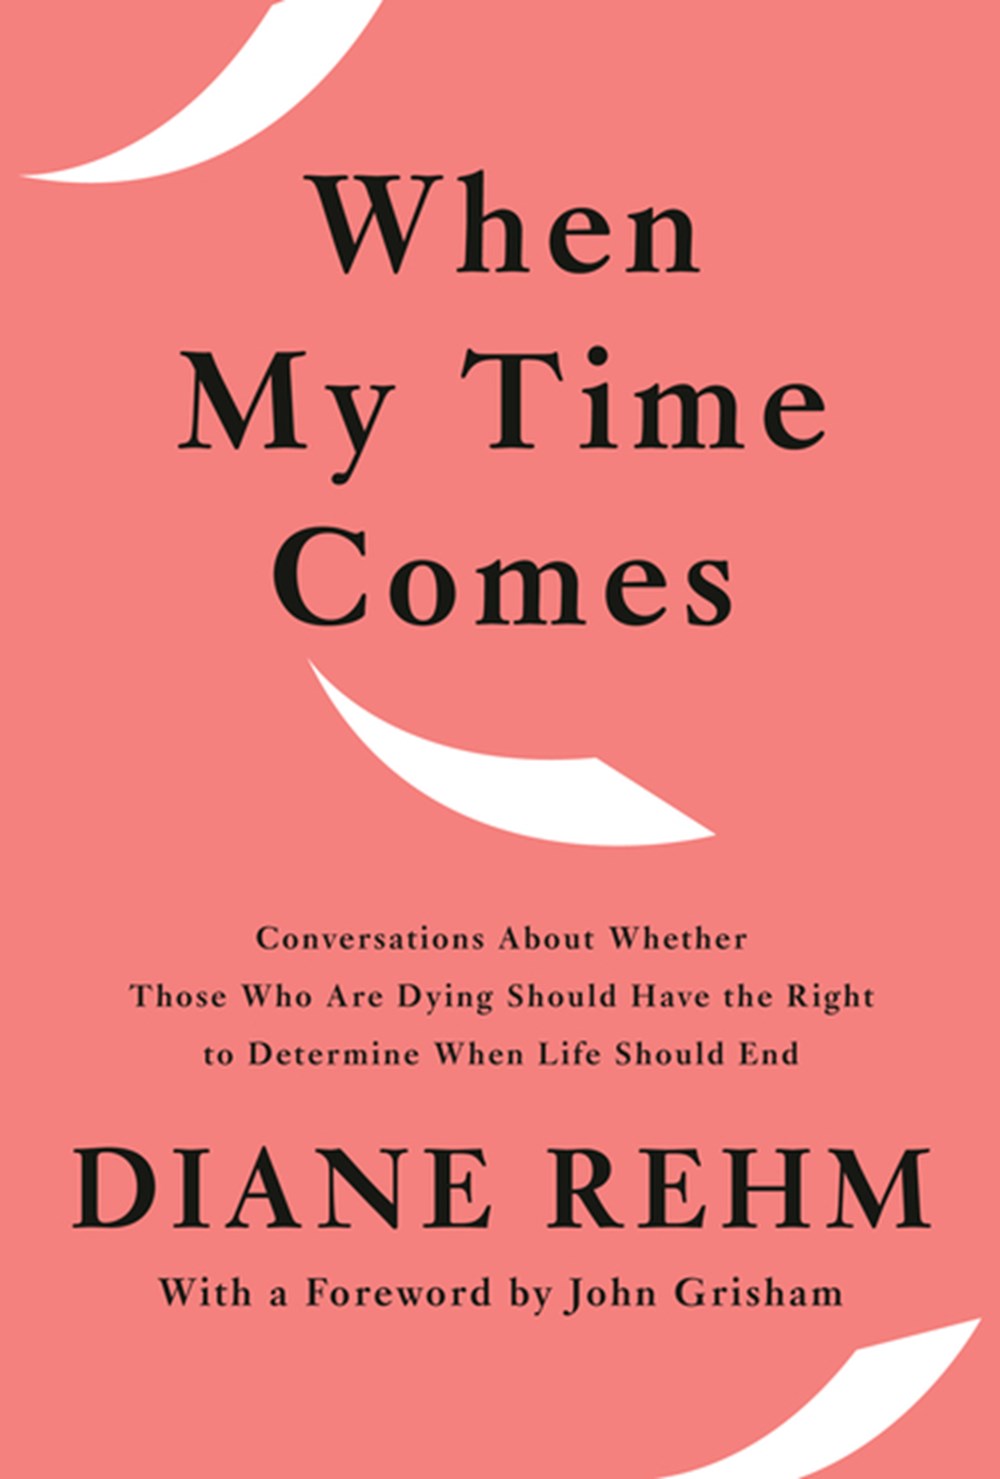 When My Time Comes: Conversations about Whether Those Who Are Dying Should Have the Right to Determi